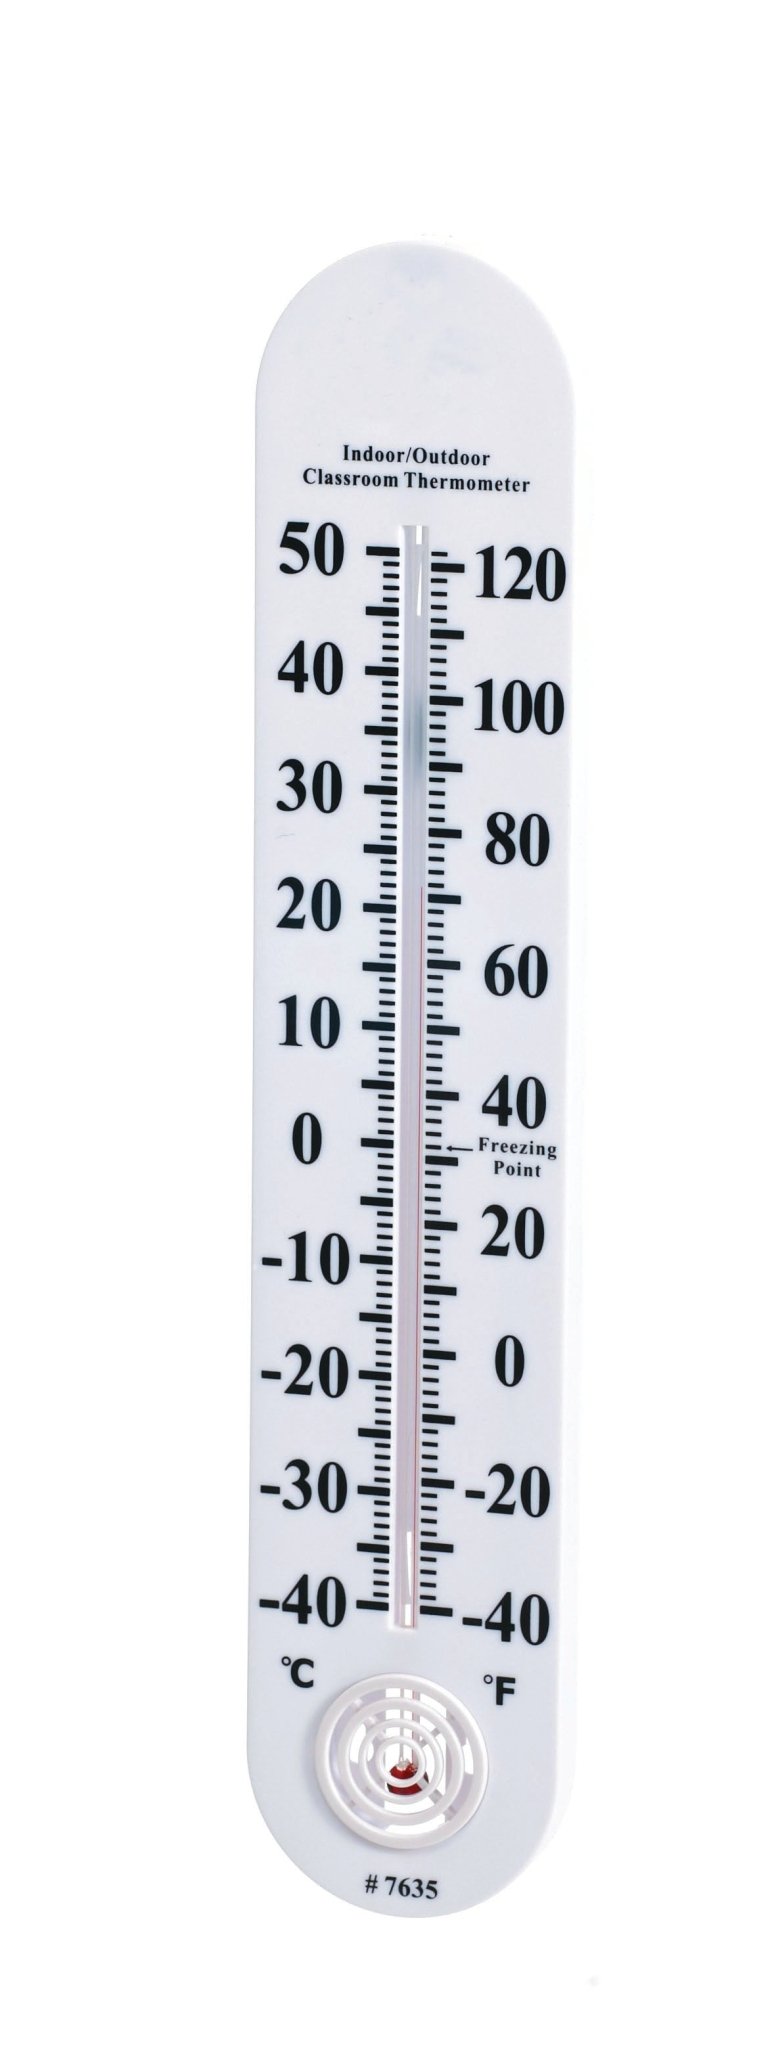 Tickit - Classroom Thermometer - Playlaan